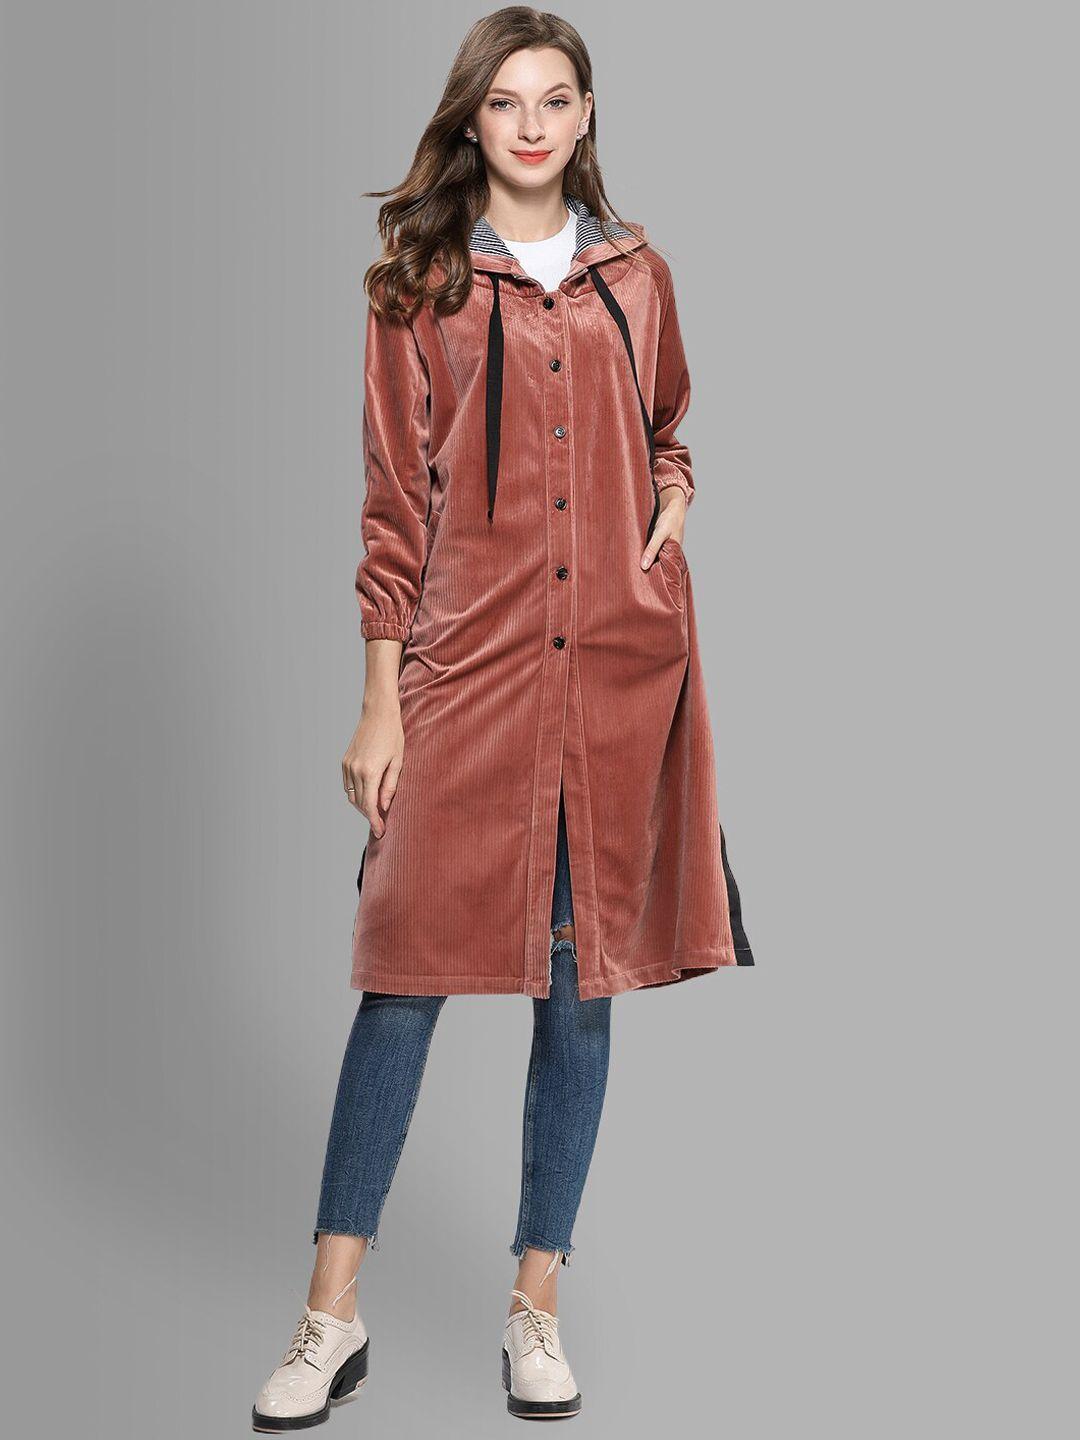 jc collection women camel brown solid hooded coat